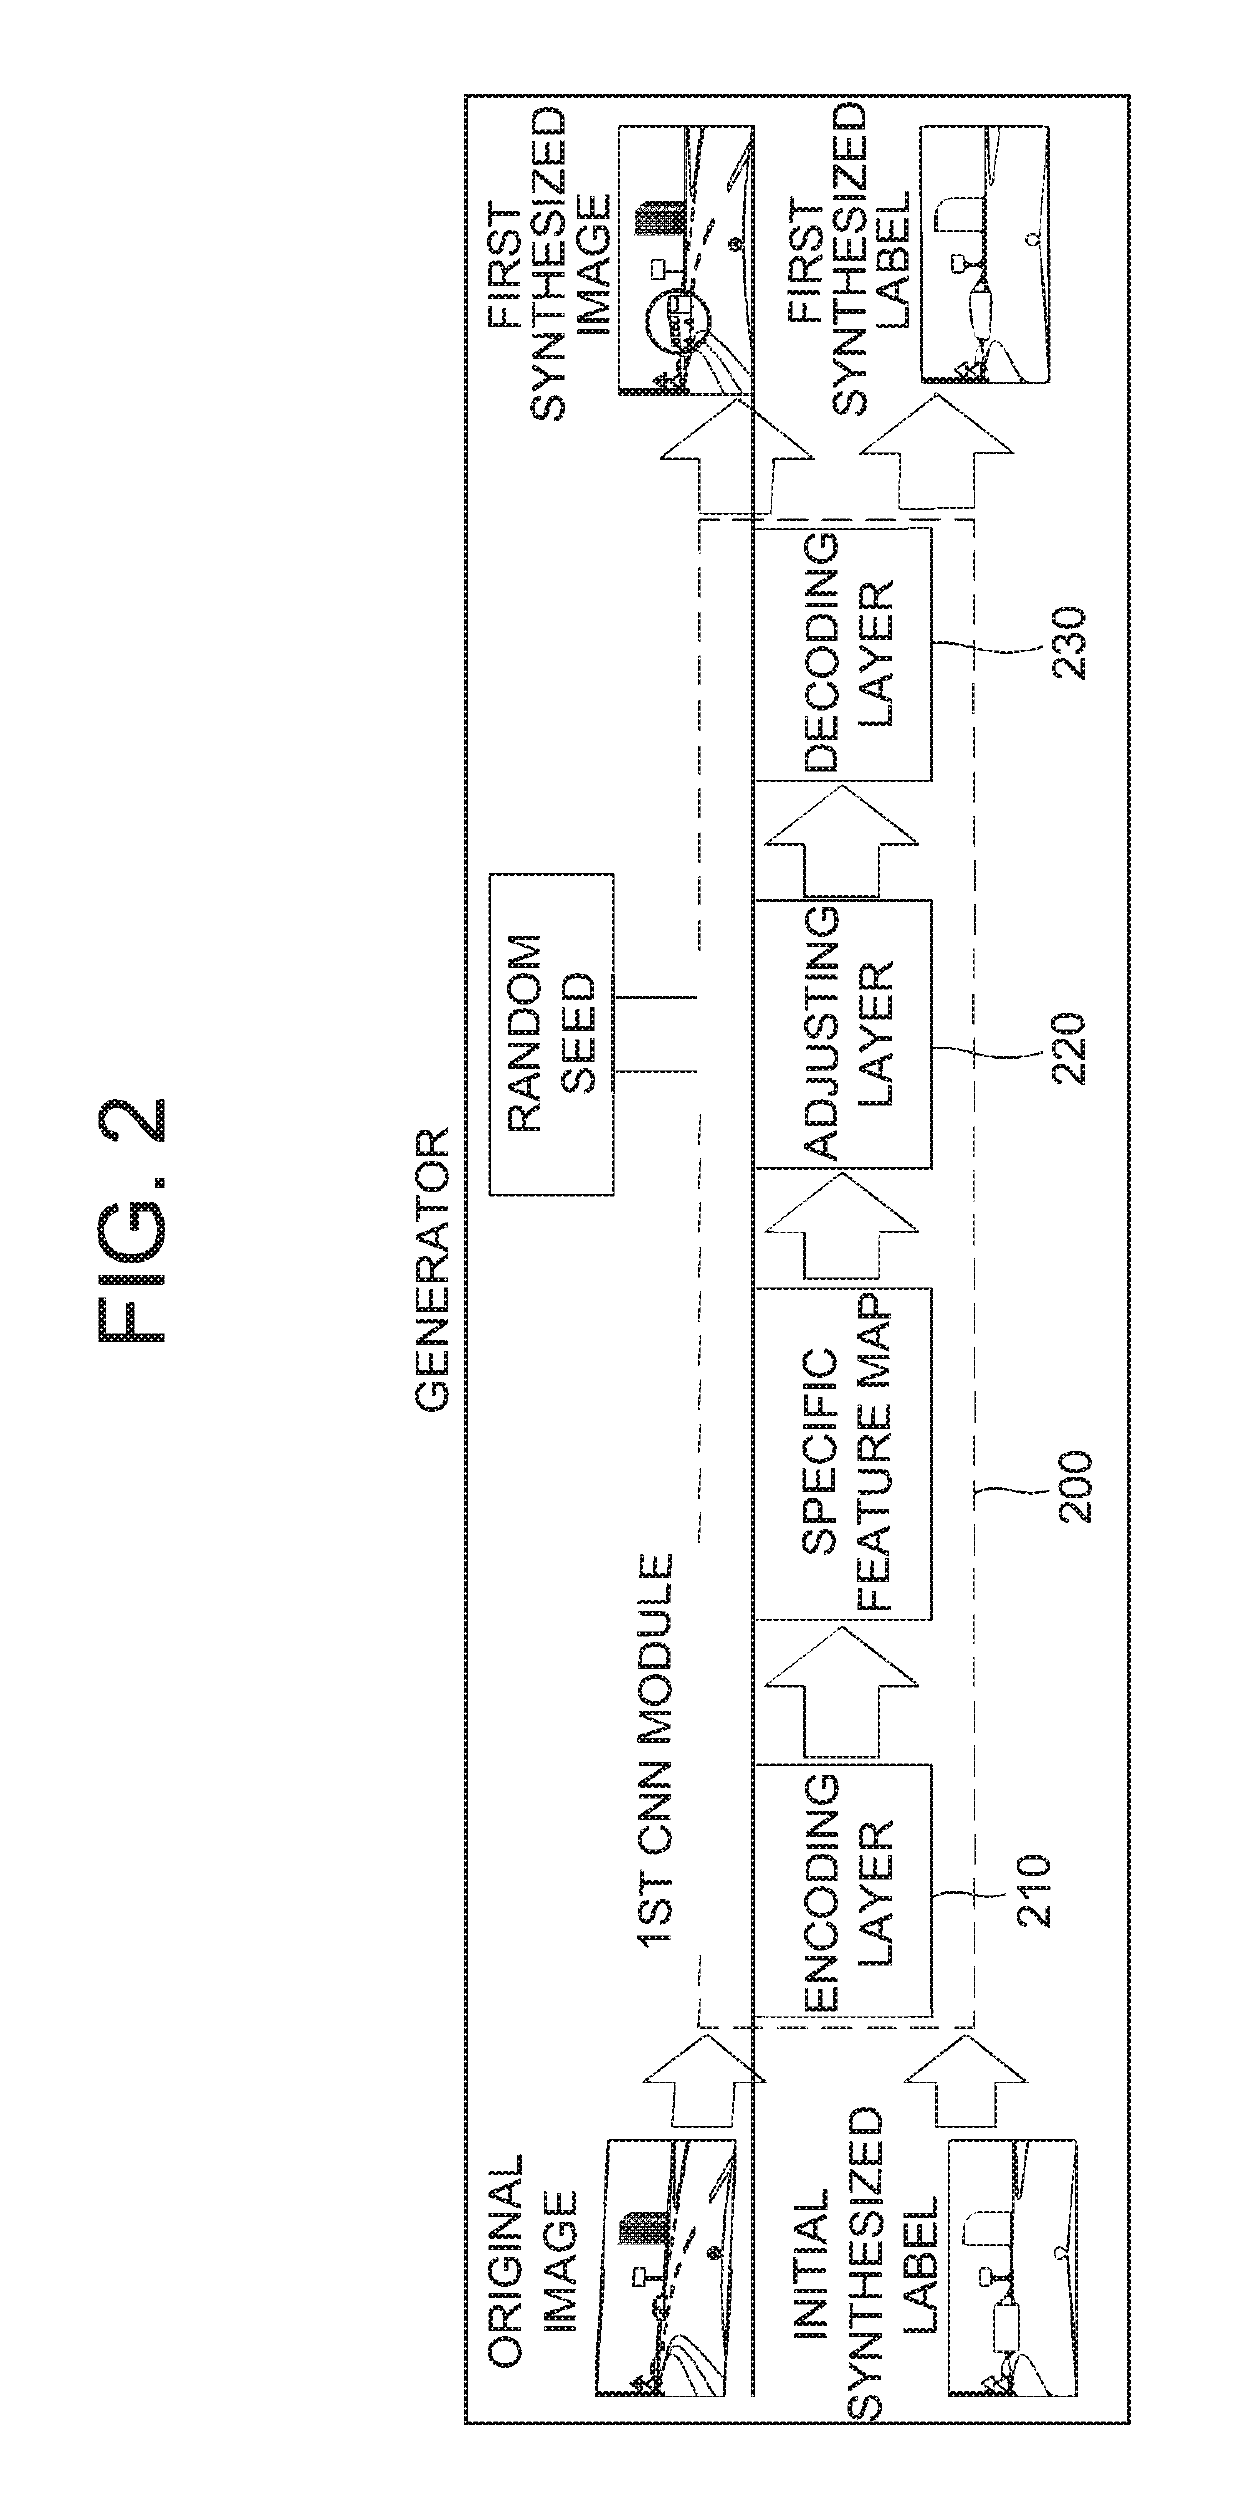 Method and device for generating image data set to be used for learning CNN capable of detecting obstruction in autonomous driving circumstance